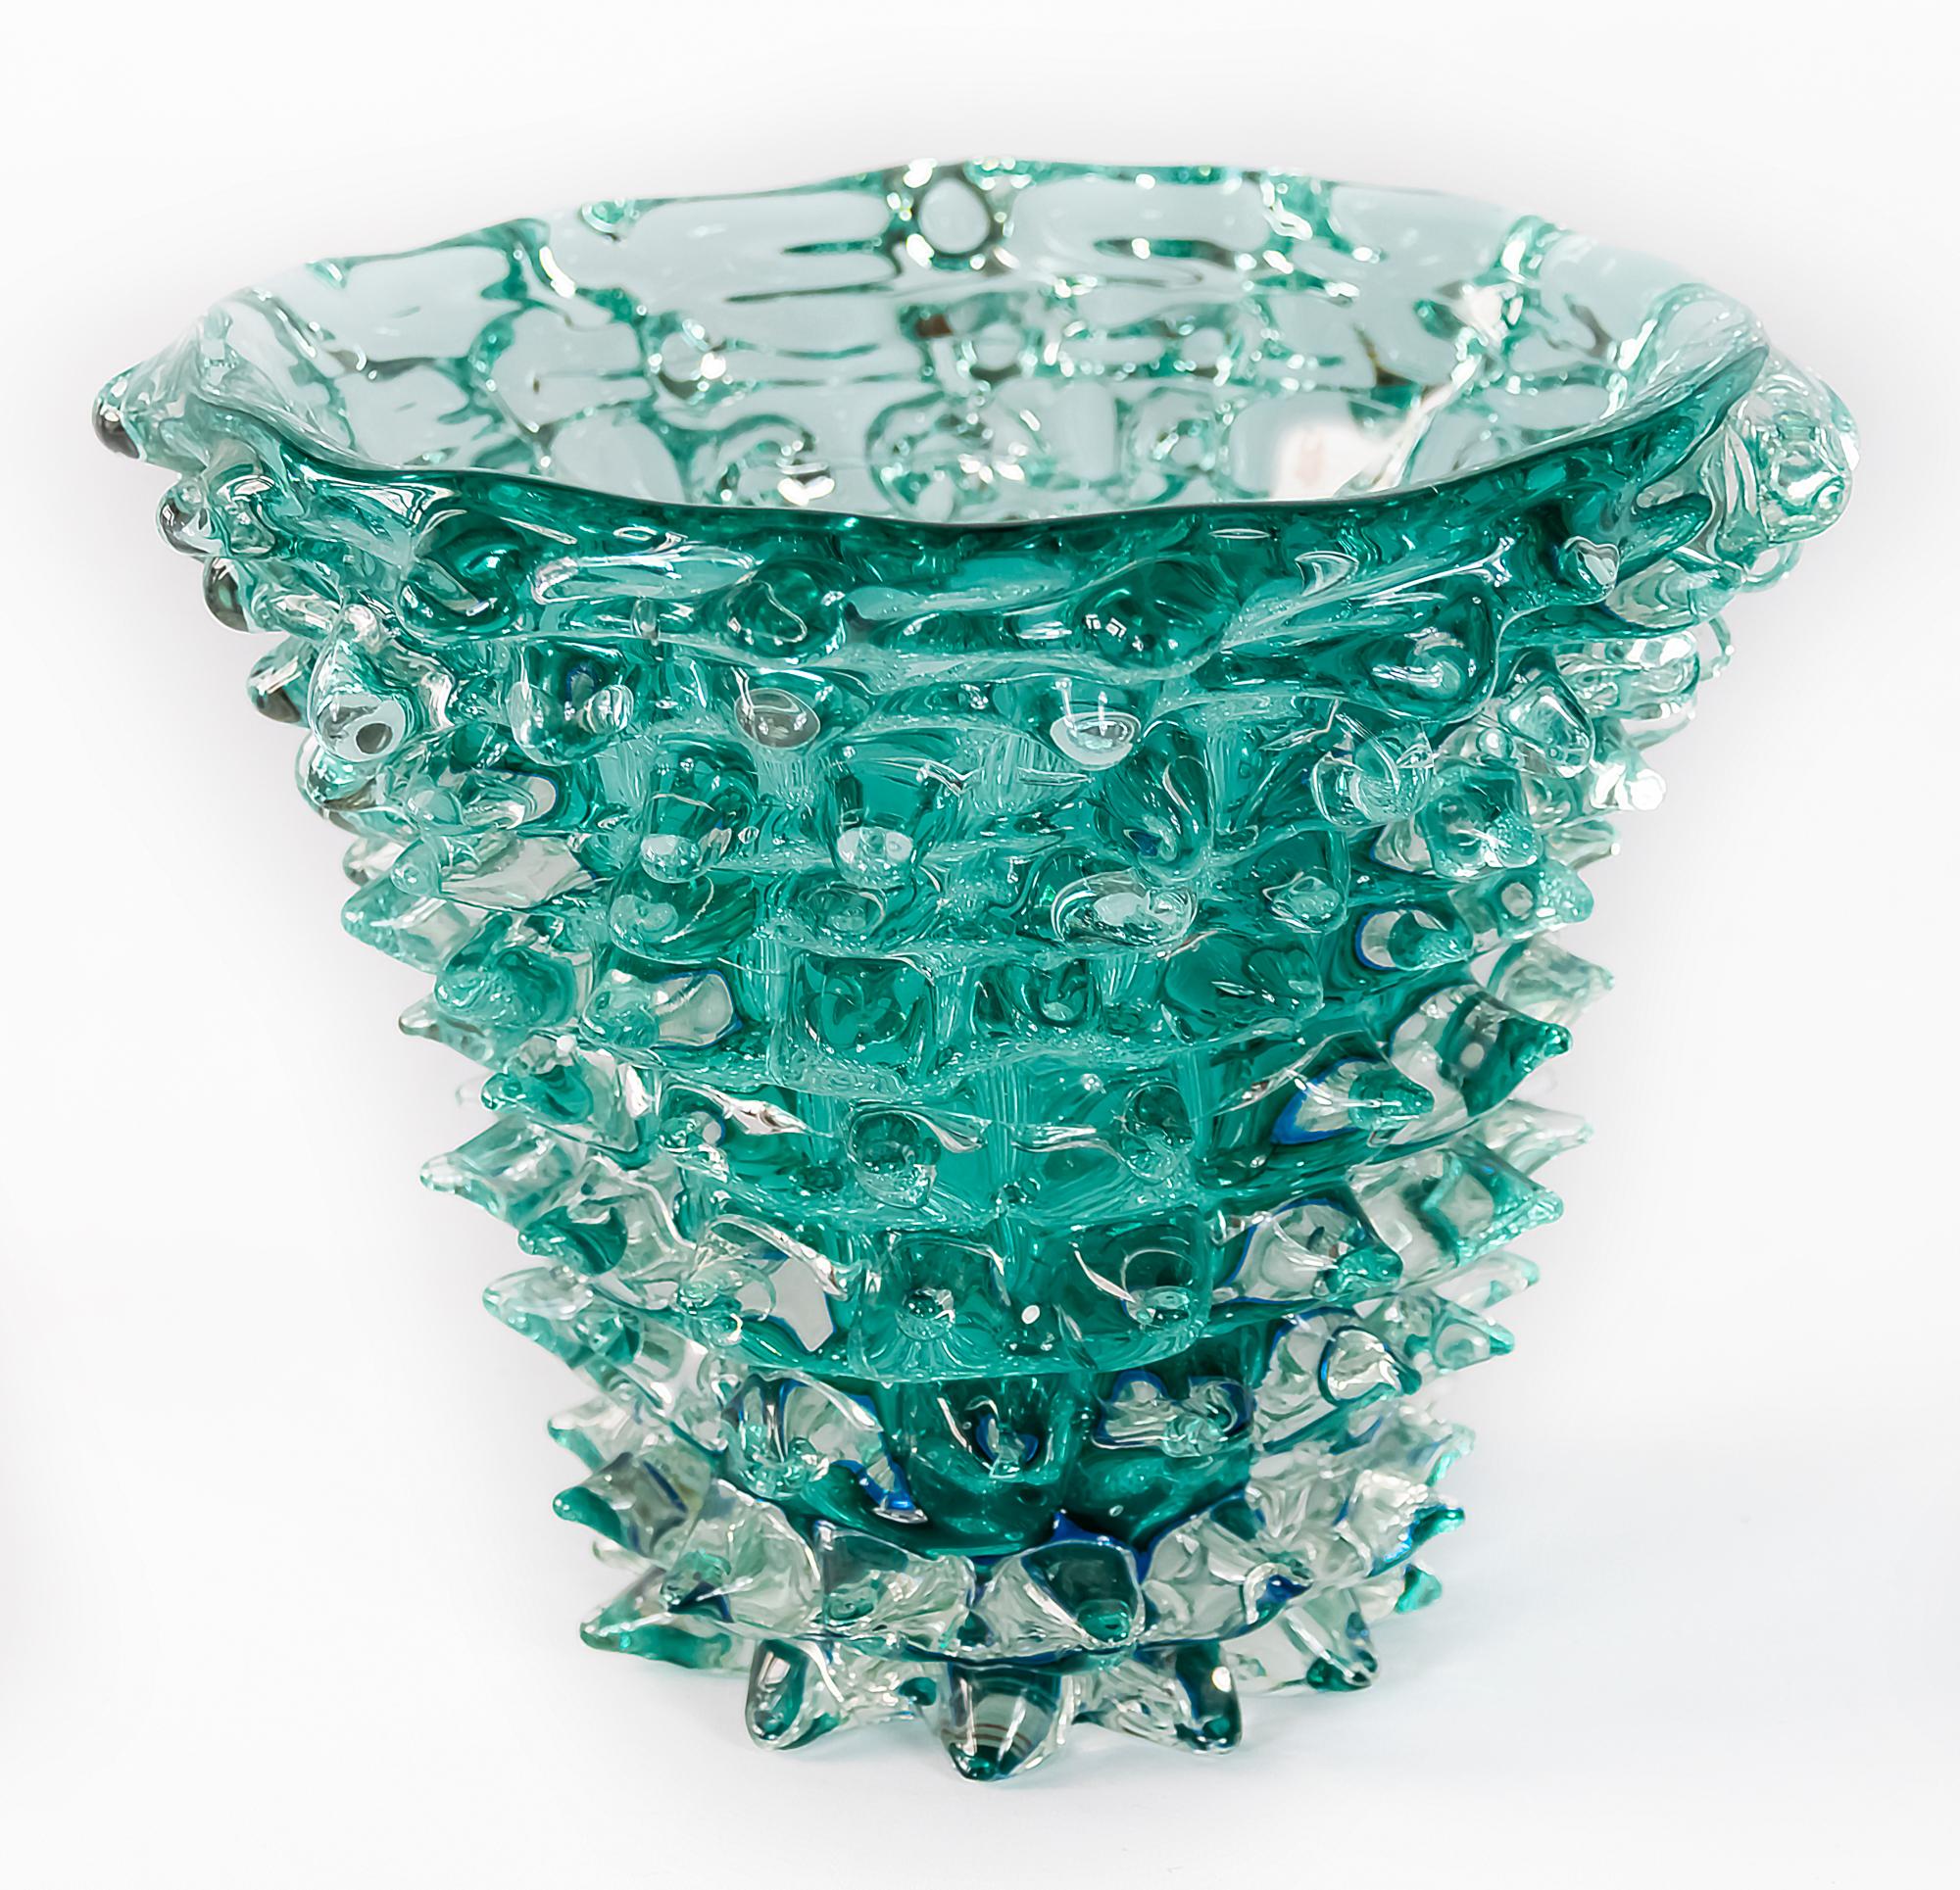 Vintage Italian handmade Murano glass vase, signed Camozzo.
The glass is emerald green colour. 
This vase is solid and heavy.